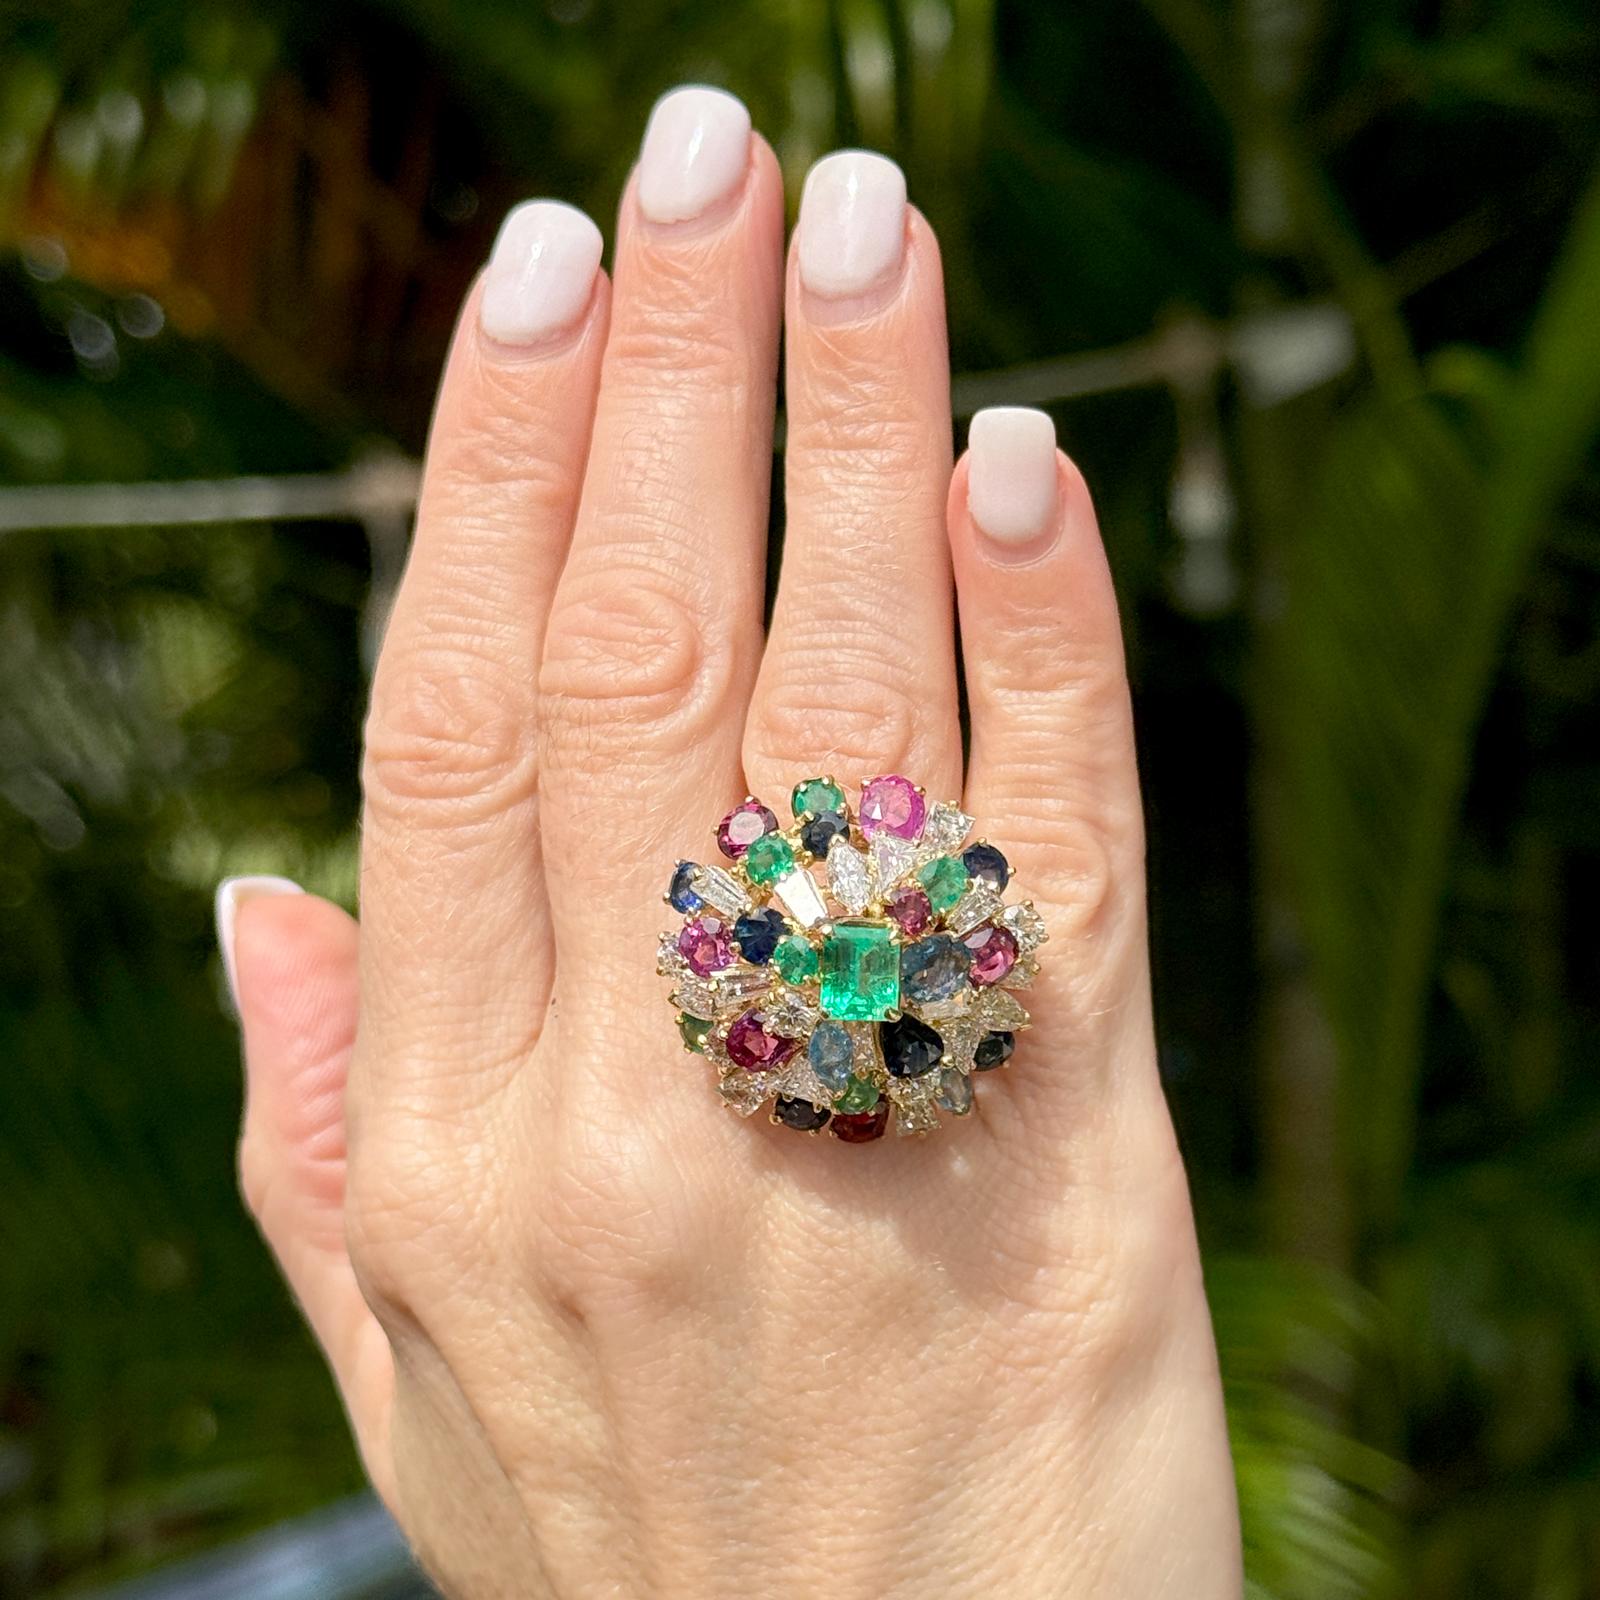 Fabulous Tutti Frutti diamond and colorful precious gemstone ring handcrafted in 18 karat yellow gold. The ring features 18 diamonds weighing approximately 4.00 carat total weight, an 1.50 carat emerald cut emerald and approximately 6.00 CTW ruby,